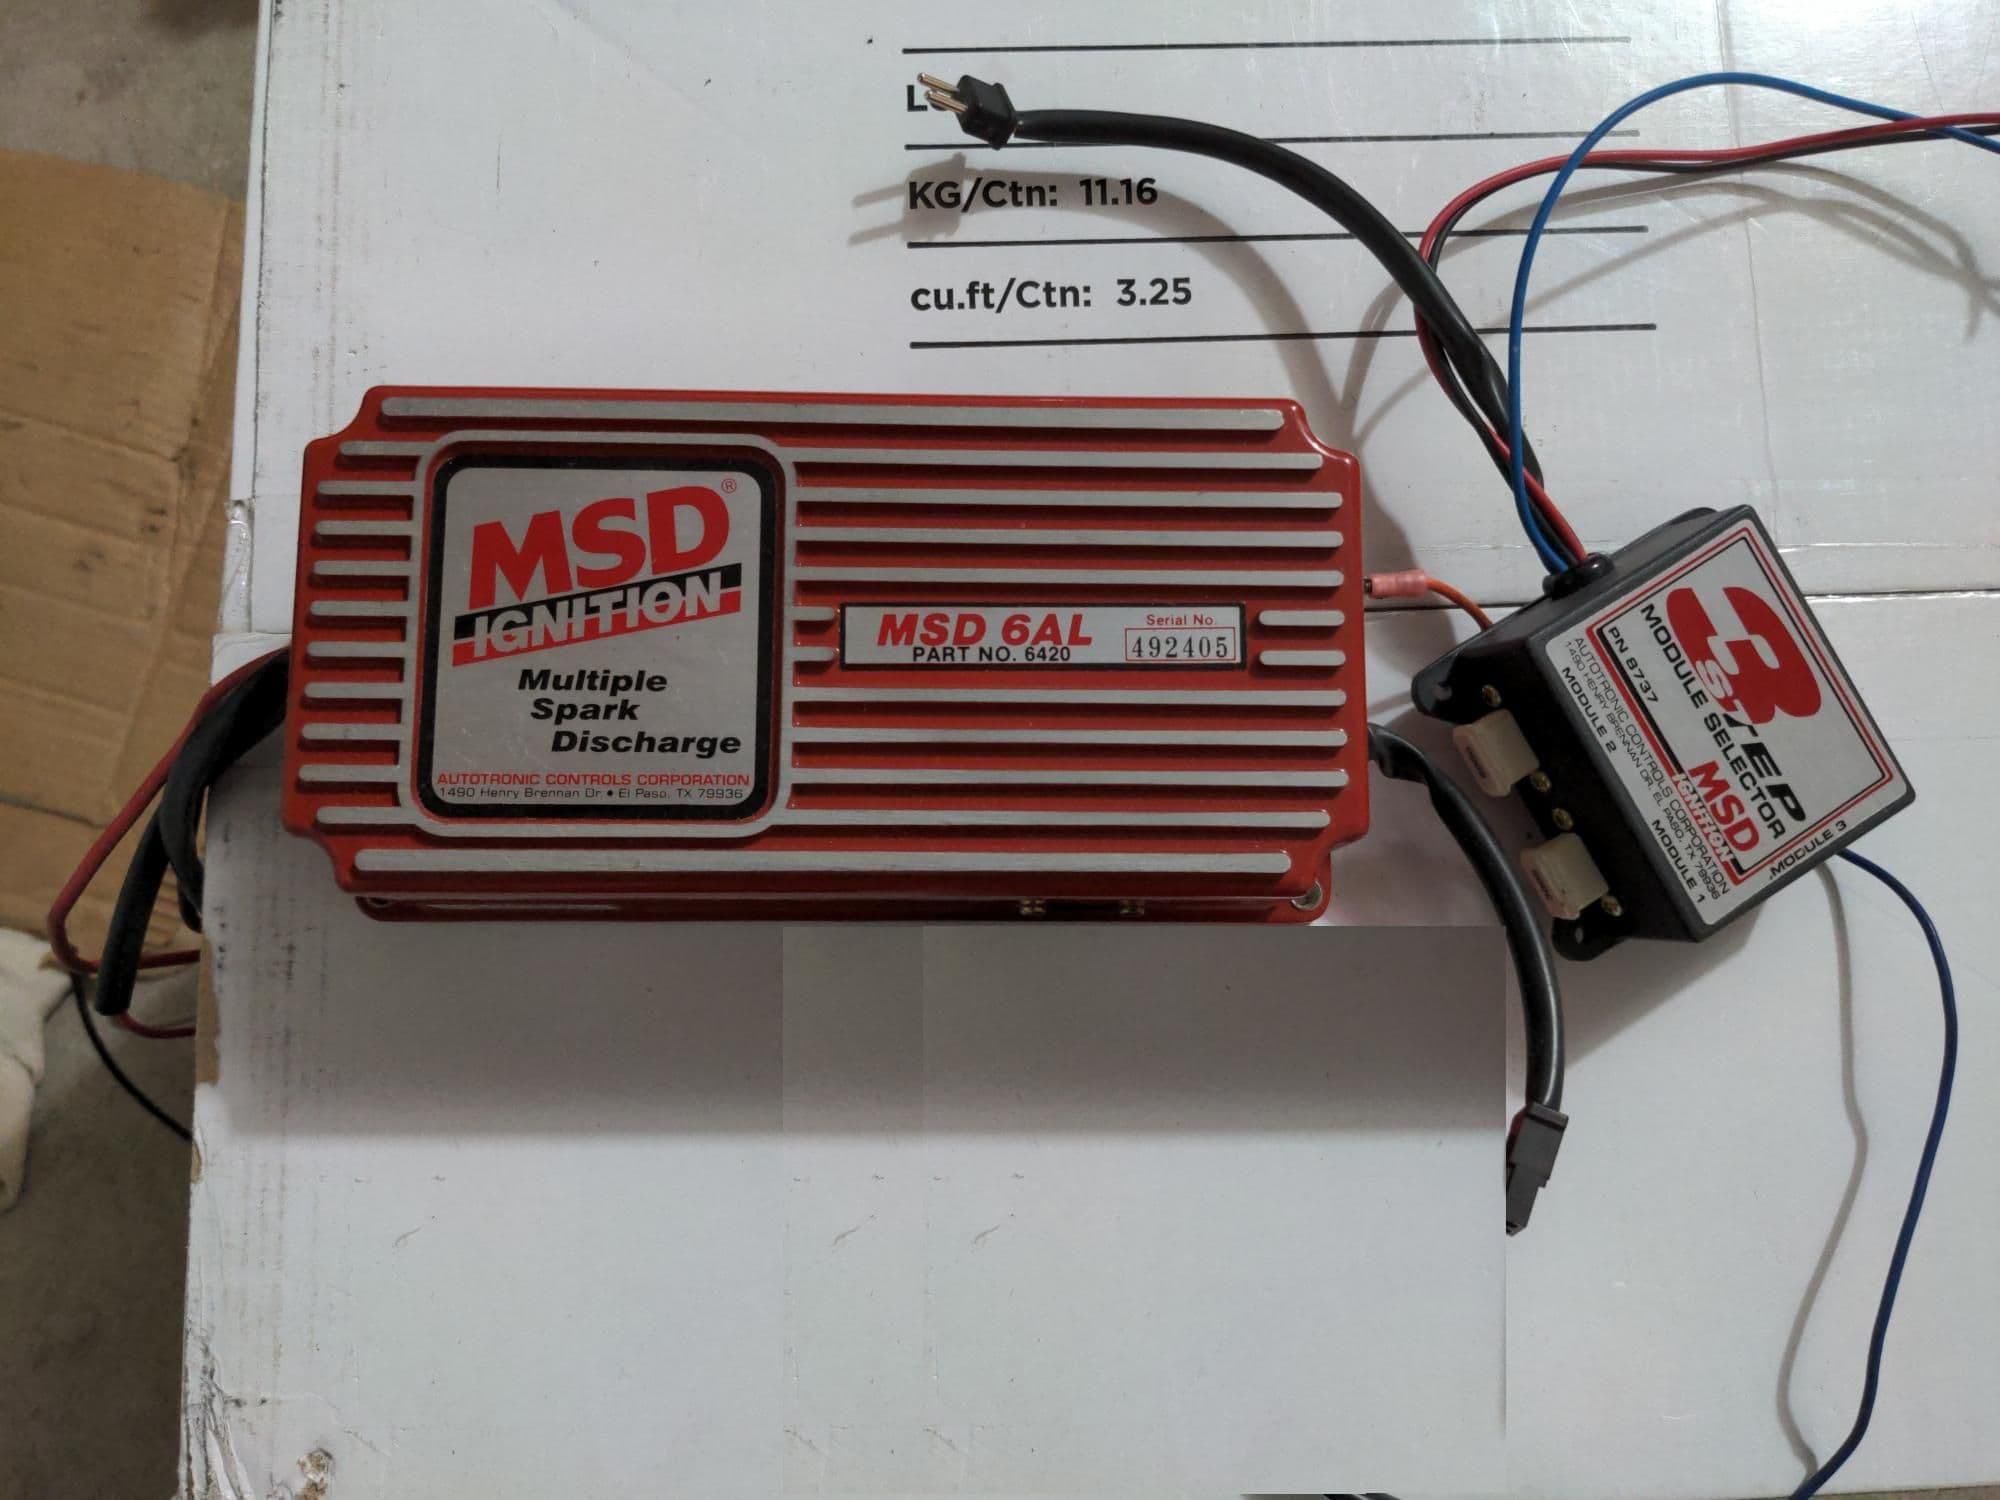 Audio Video/Electronics - Additional Injector Controller & MSD 6AL with 3 Step - Used - 0  All Models - Mississauga, ON L5N1K9, Canada